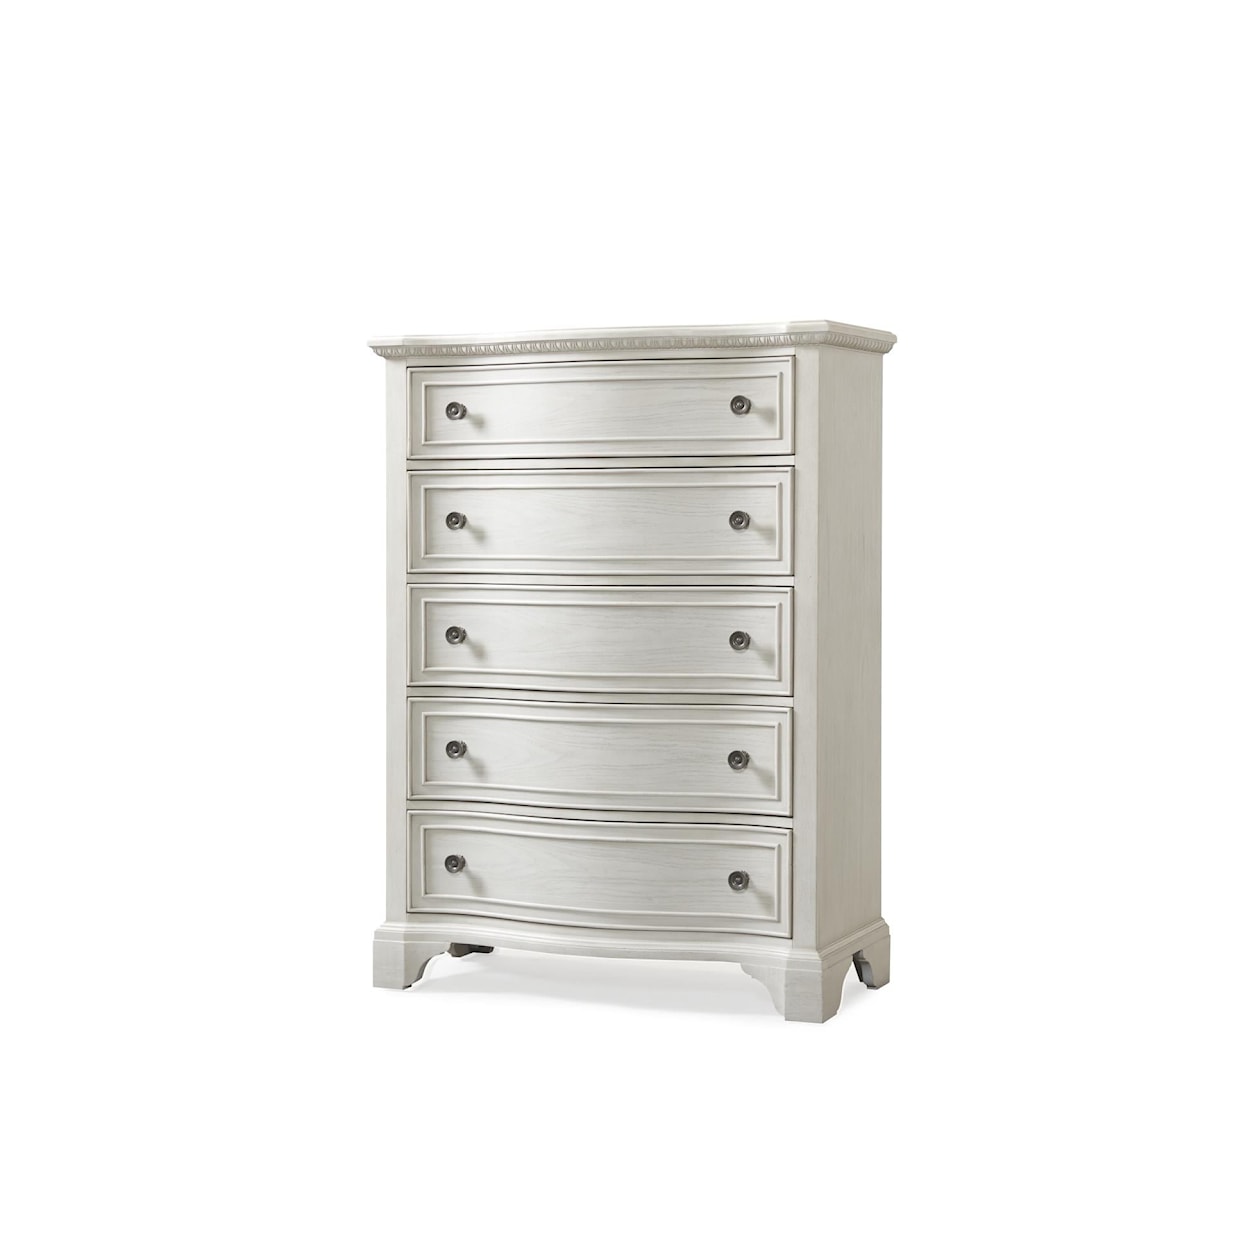 Trisha Yearwood Home Collection by Legacy Classic Jasper County 5-Drawer Chest